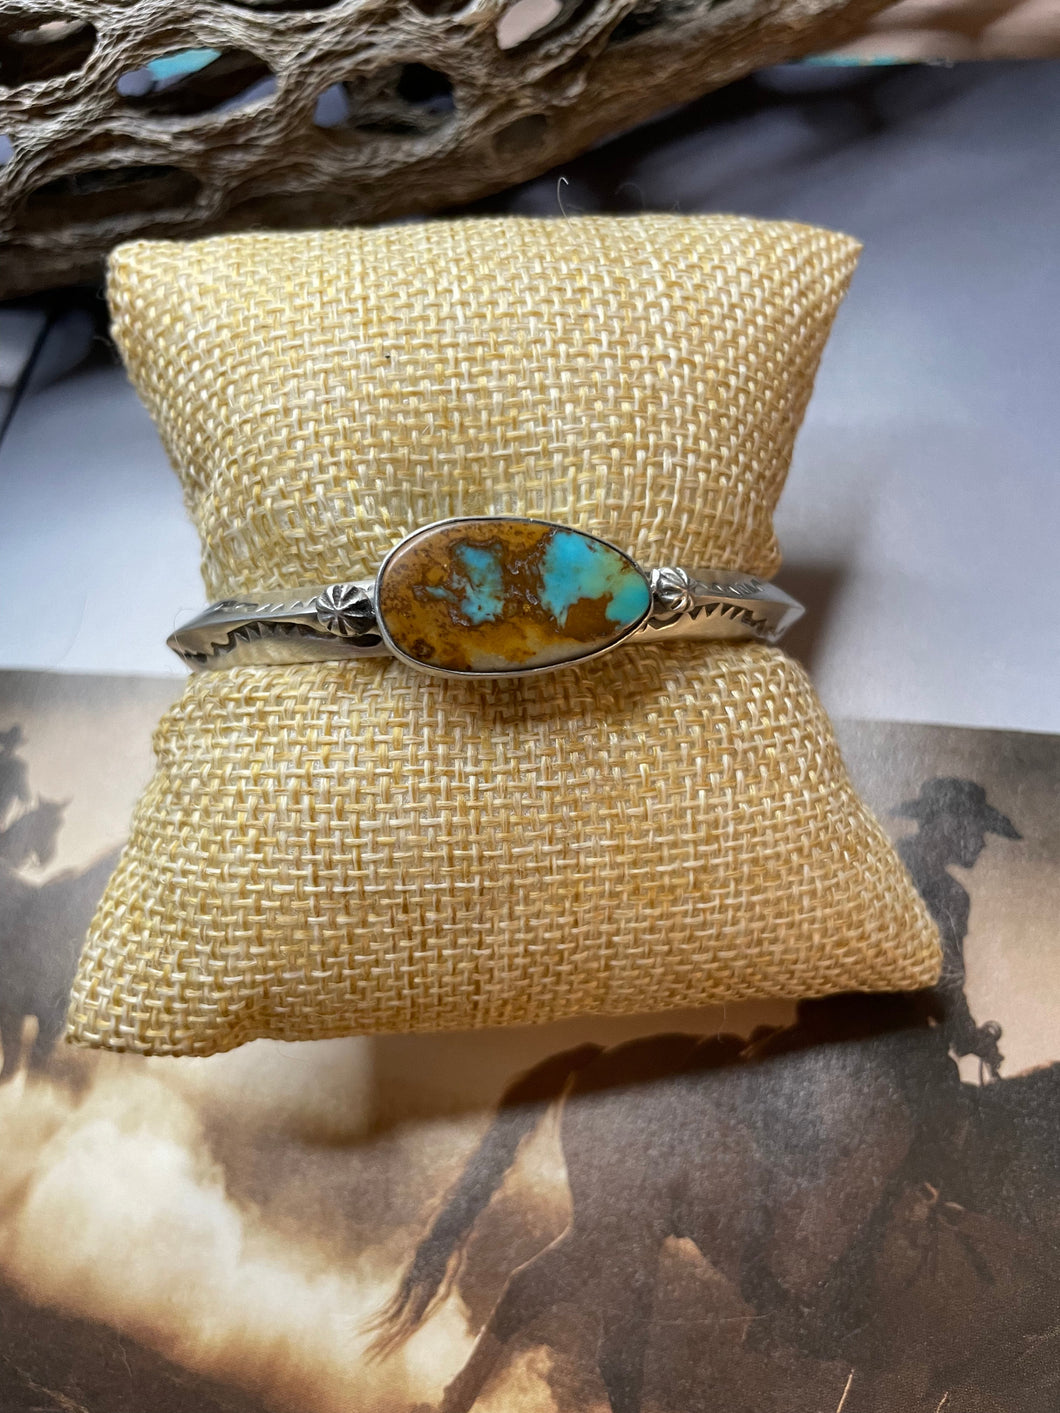 Navajo Hand Stamped Sterling Silver & Turquoise Cuff Bracelet Signed